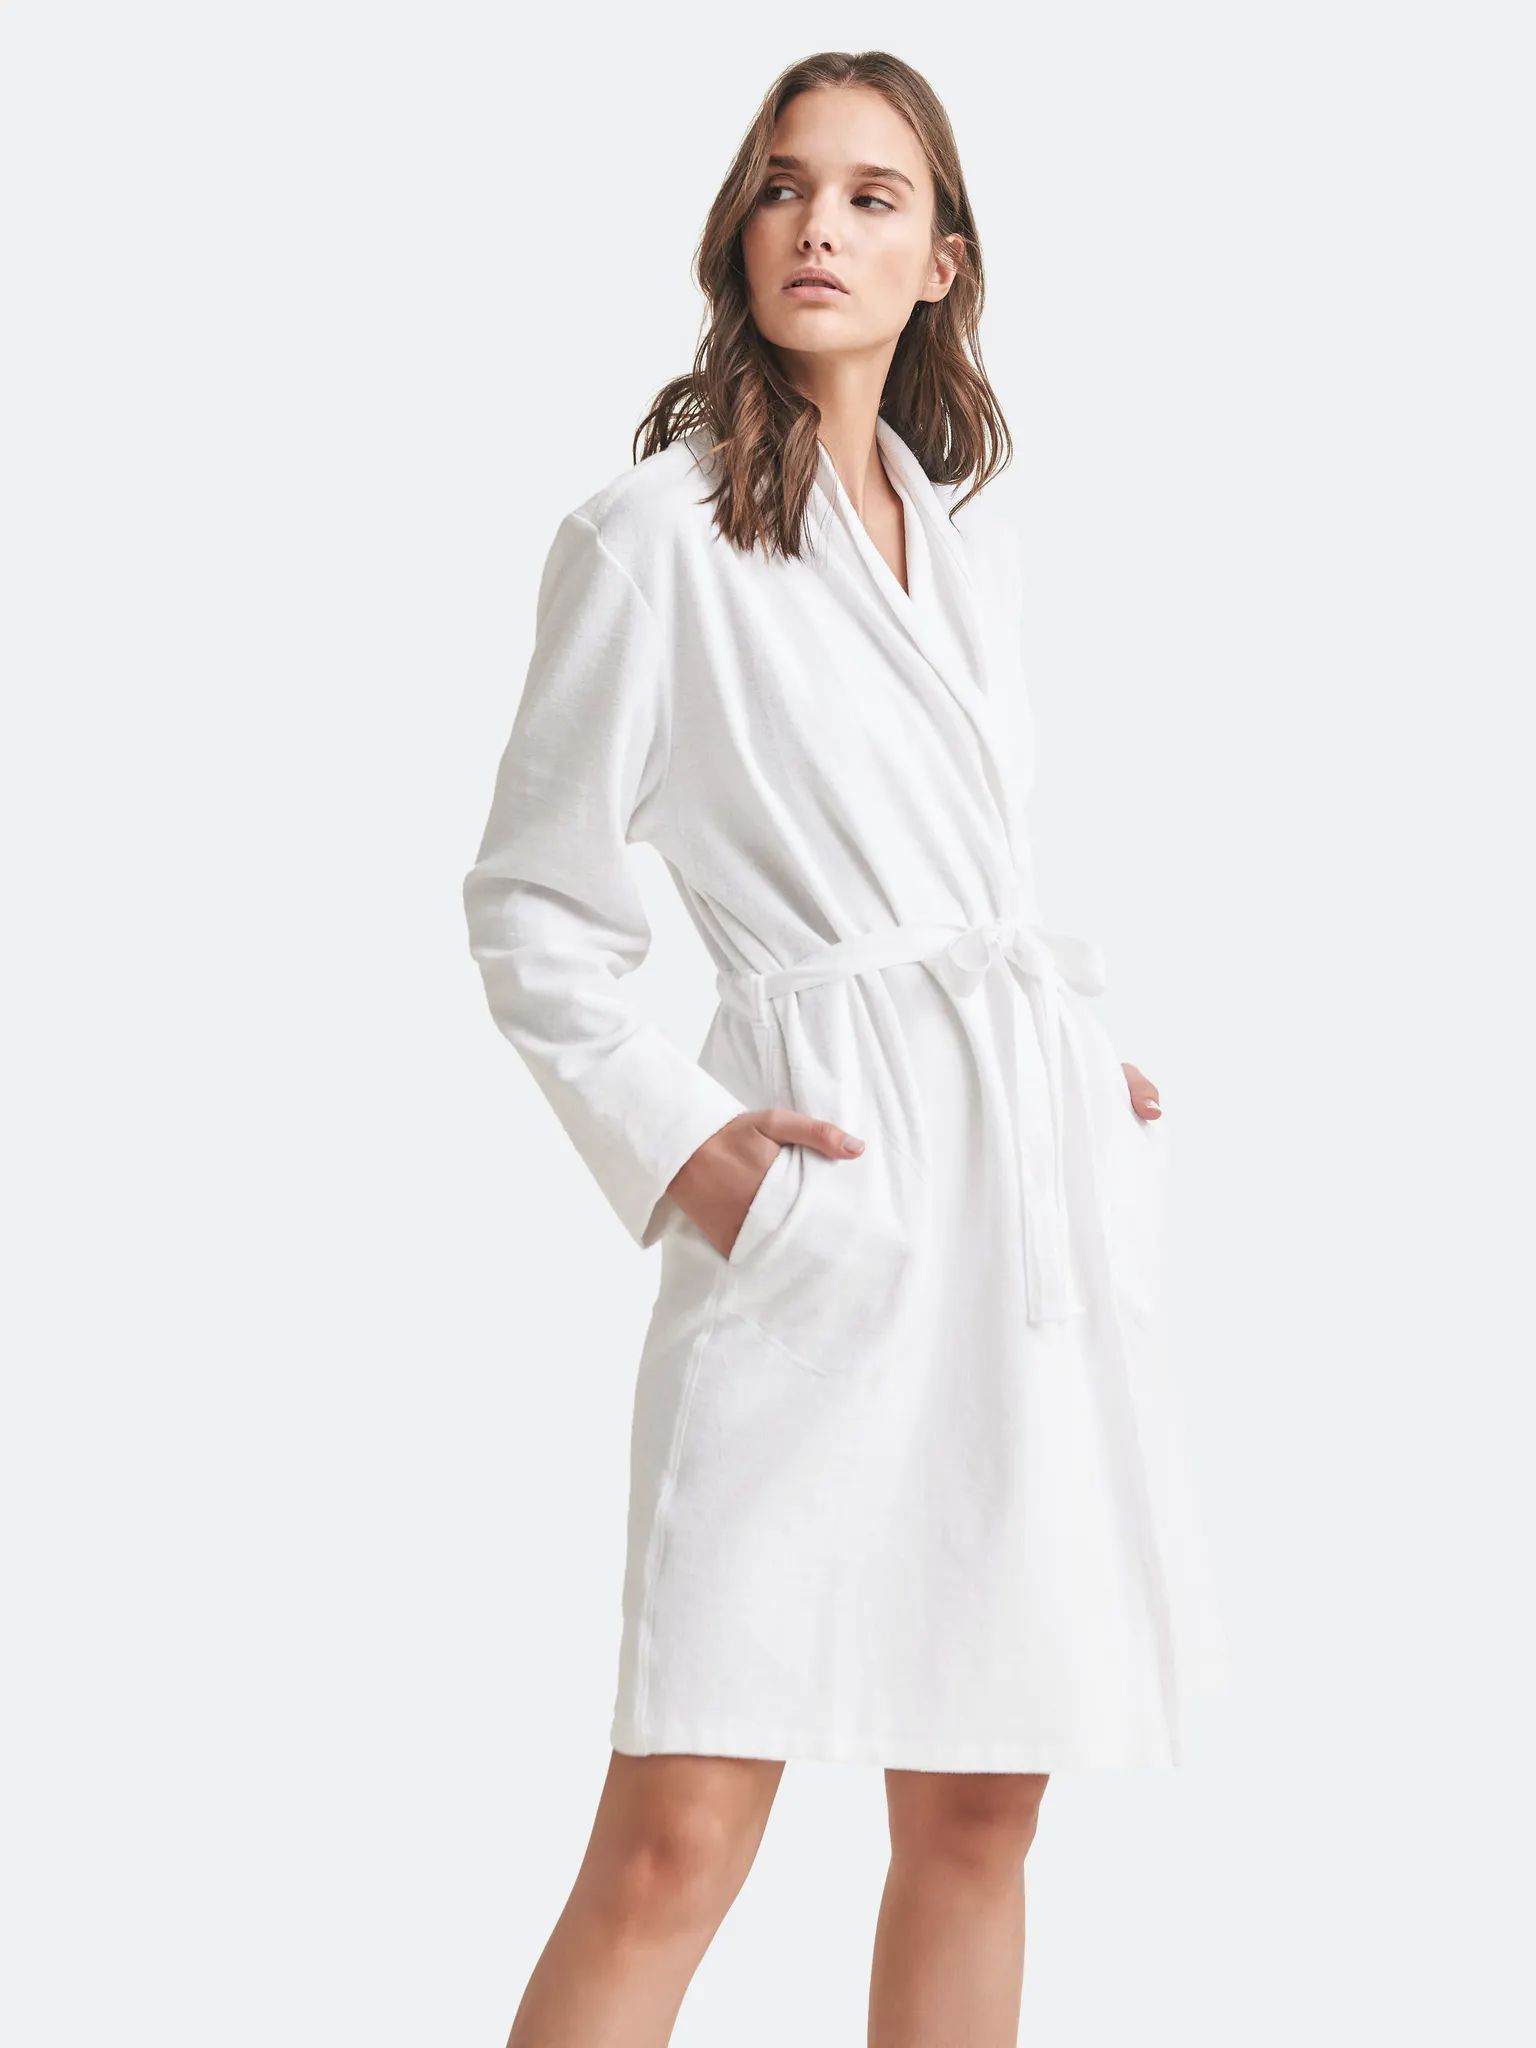 French Terry Robe with Belt | Verishop